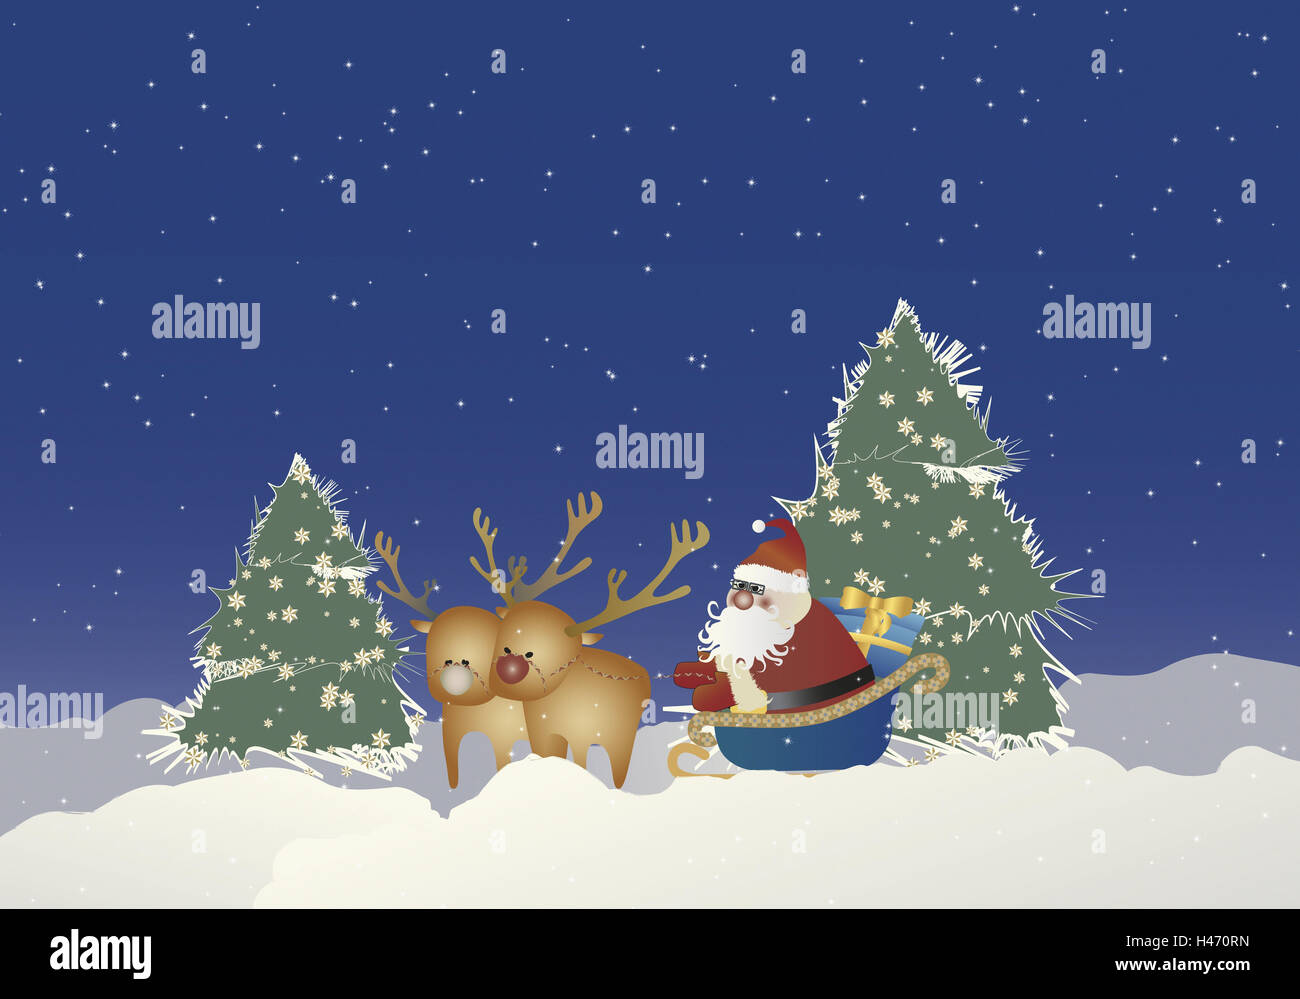 Illustration, Santa Claus, reindeer sleigh, Christmas presents, night, graphics, Christmas, for Christmas, wintry, wood, winter scenery, winter wood, trees, scenery, Christmas trees, snow, Santa Claus, go, slides, reindeers, packages, presents, distribute Stock Photo